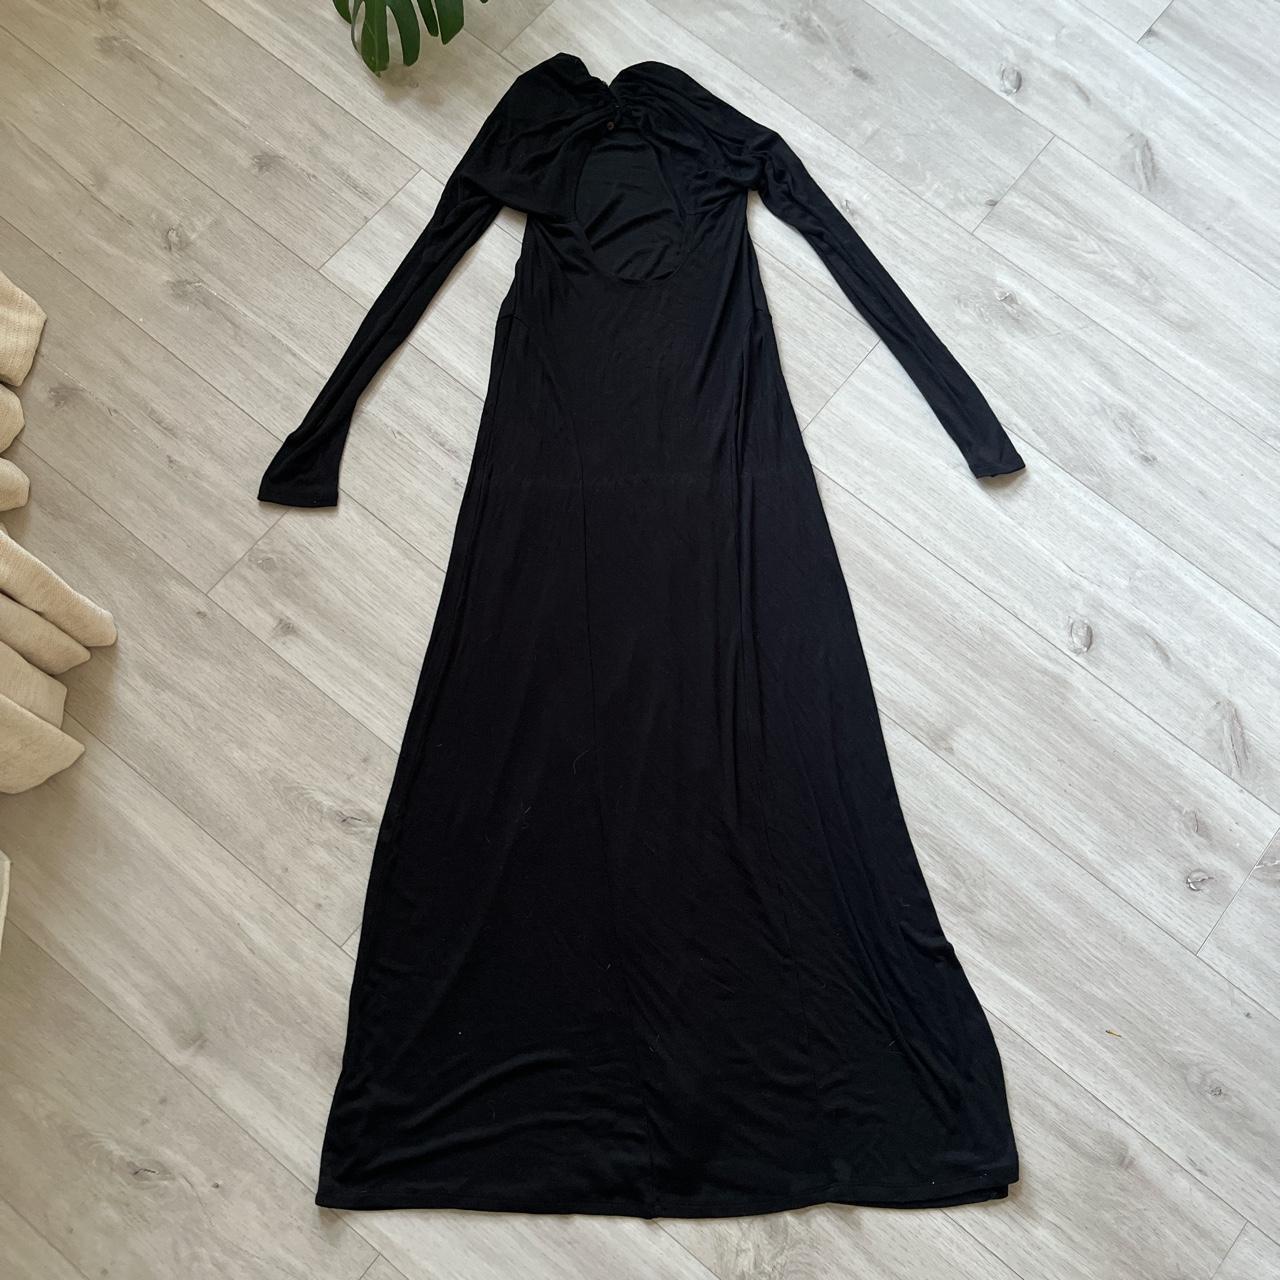 Free People Beach Black Dress Small New with... - Depop